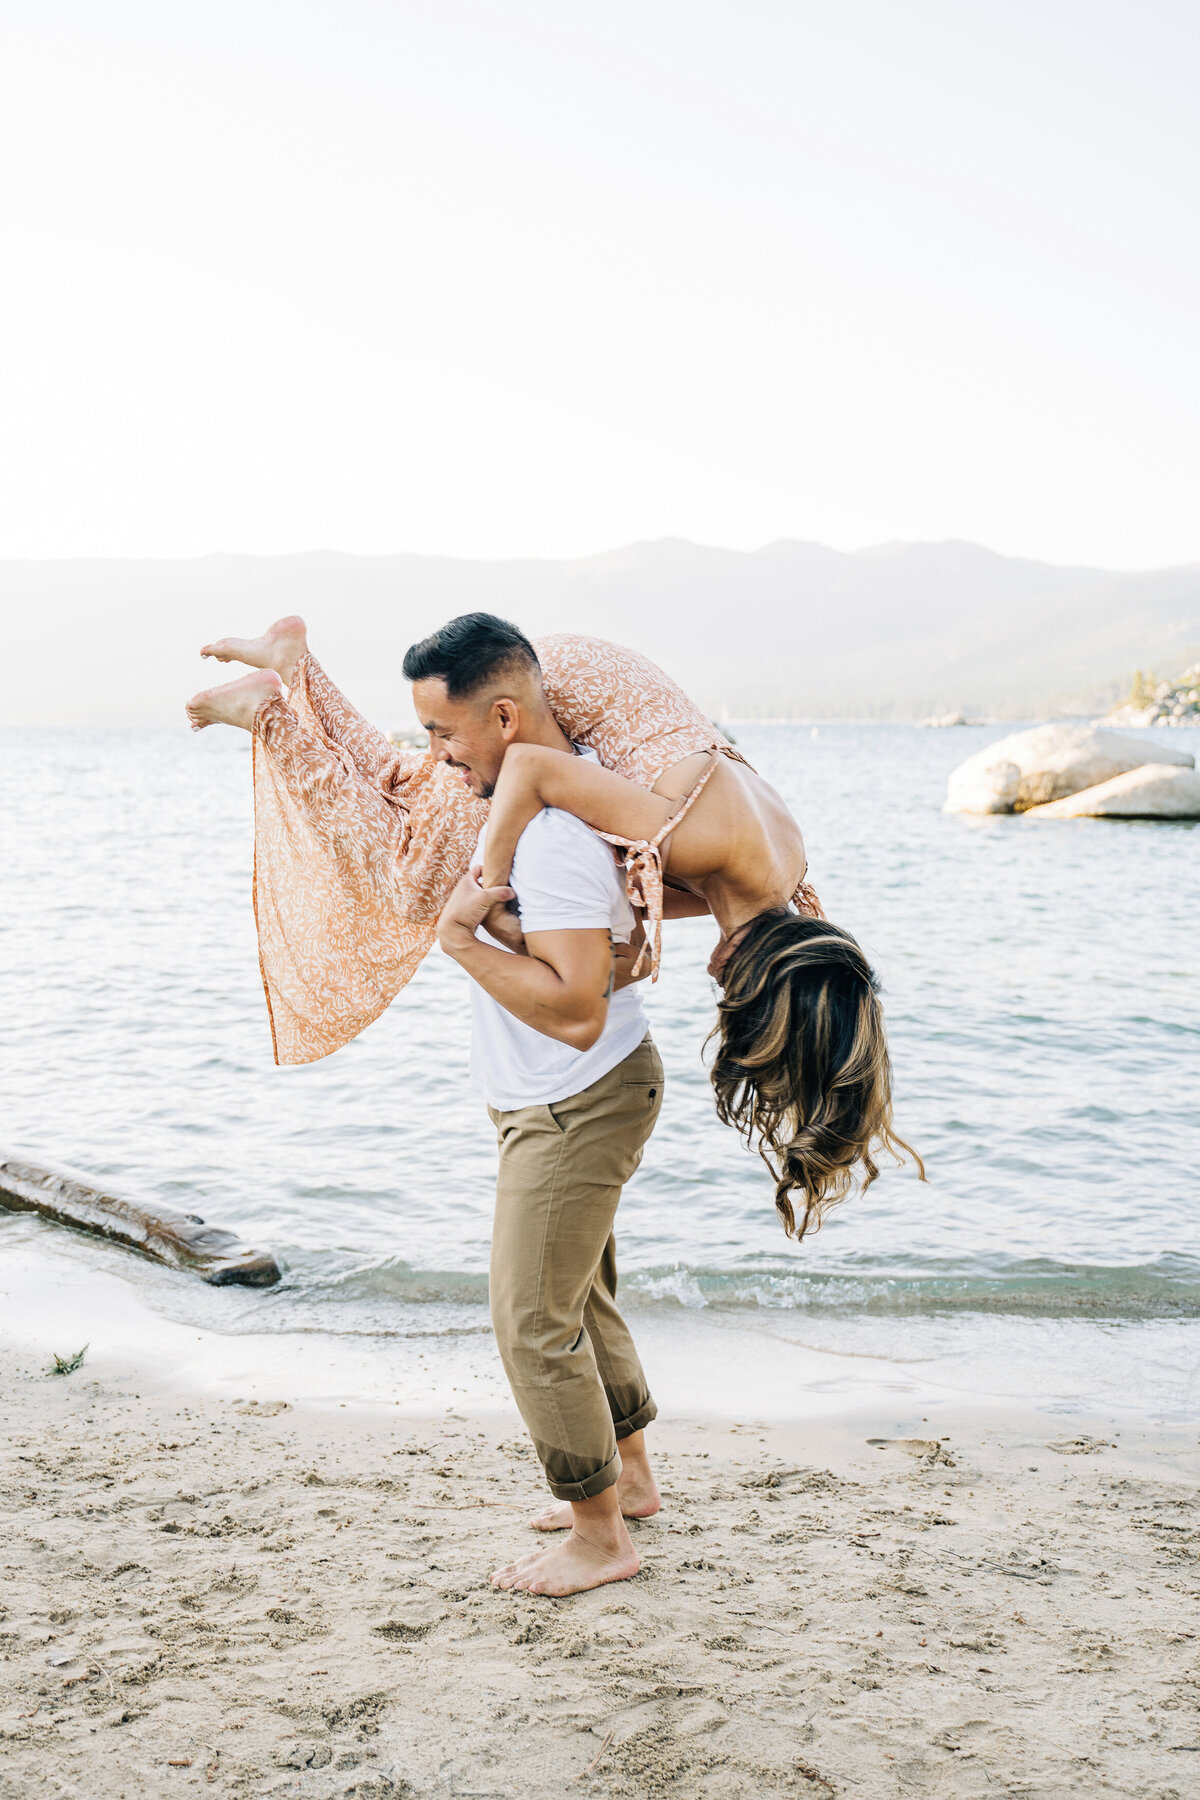 Man carries woman by lake in engagement shoot